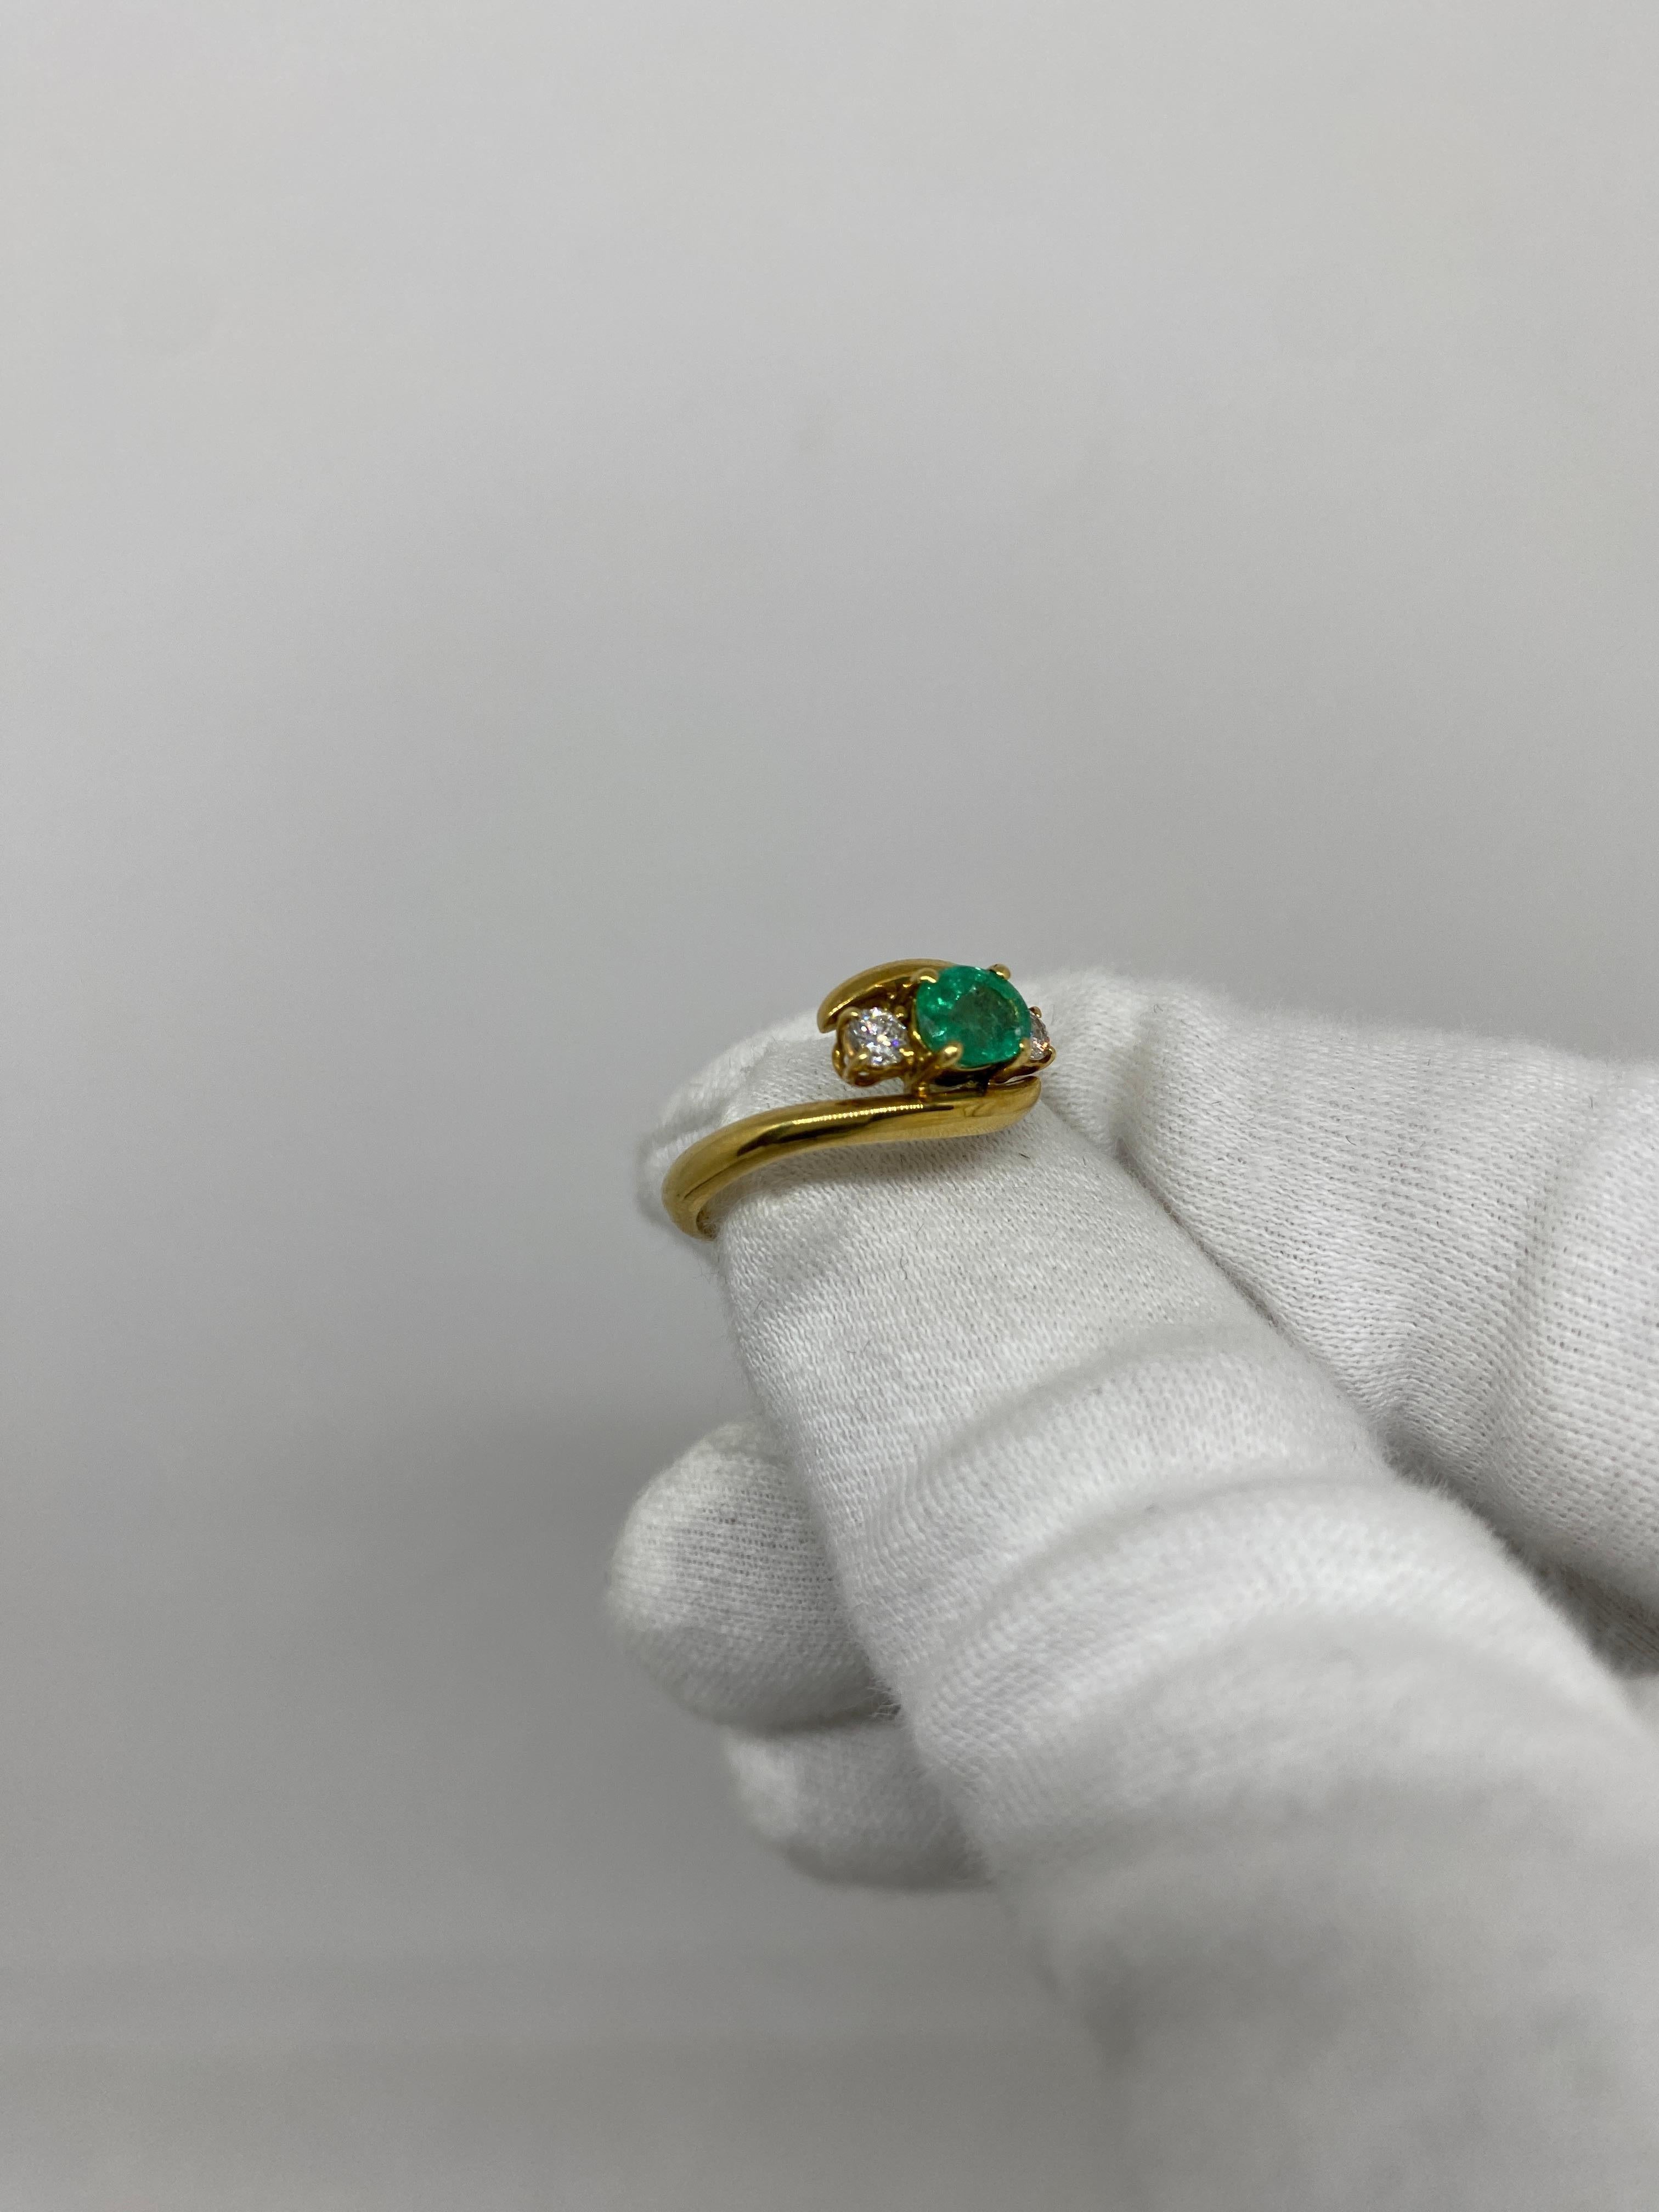 Ring made of 18kt yellow gold with oval-cut natural emerald and natural white brilliant-cut diamonds

Welcome to our jewelry collection, where every piece tells a story of timeless elegance and unparalleled craftsmanship. As a family-run business in